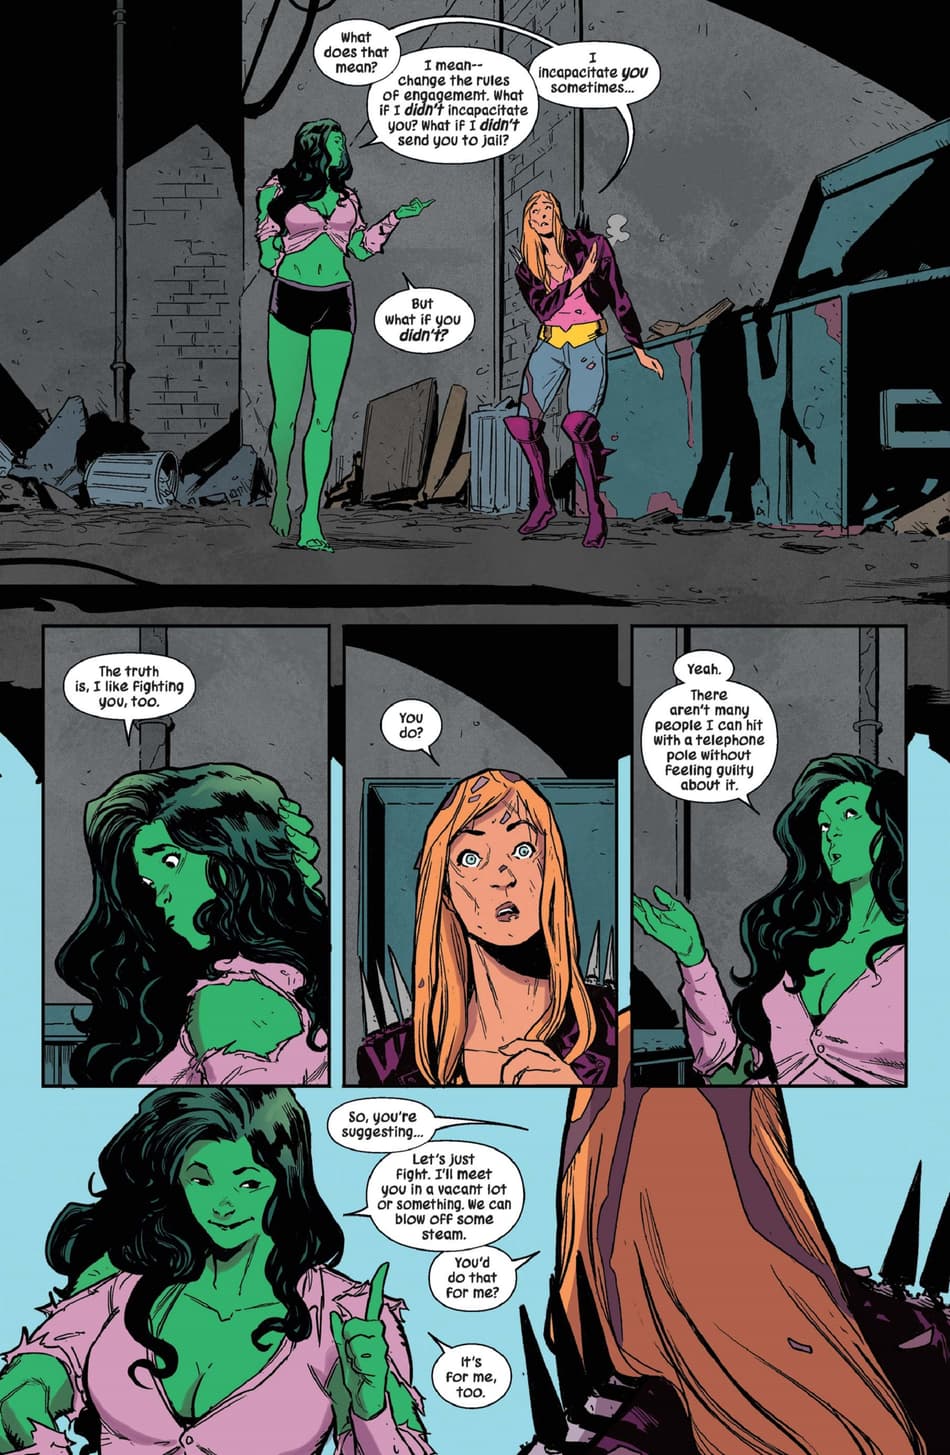 Titania and She-Hulk change the “rules of engagement” in SHE-HULK (2022) #1.